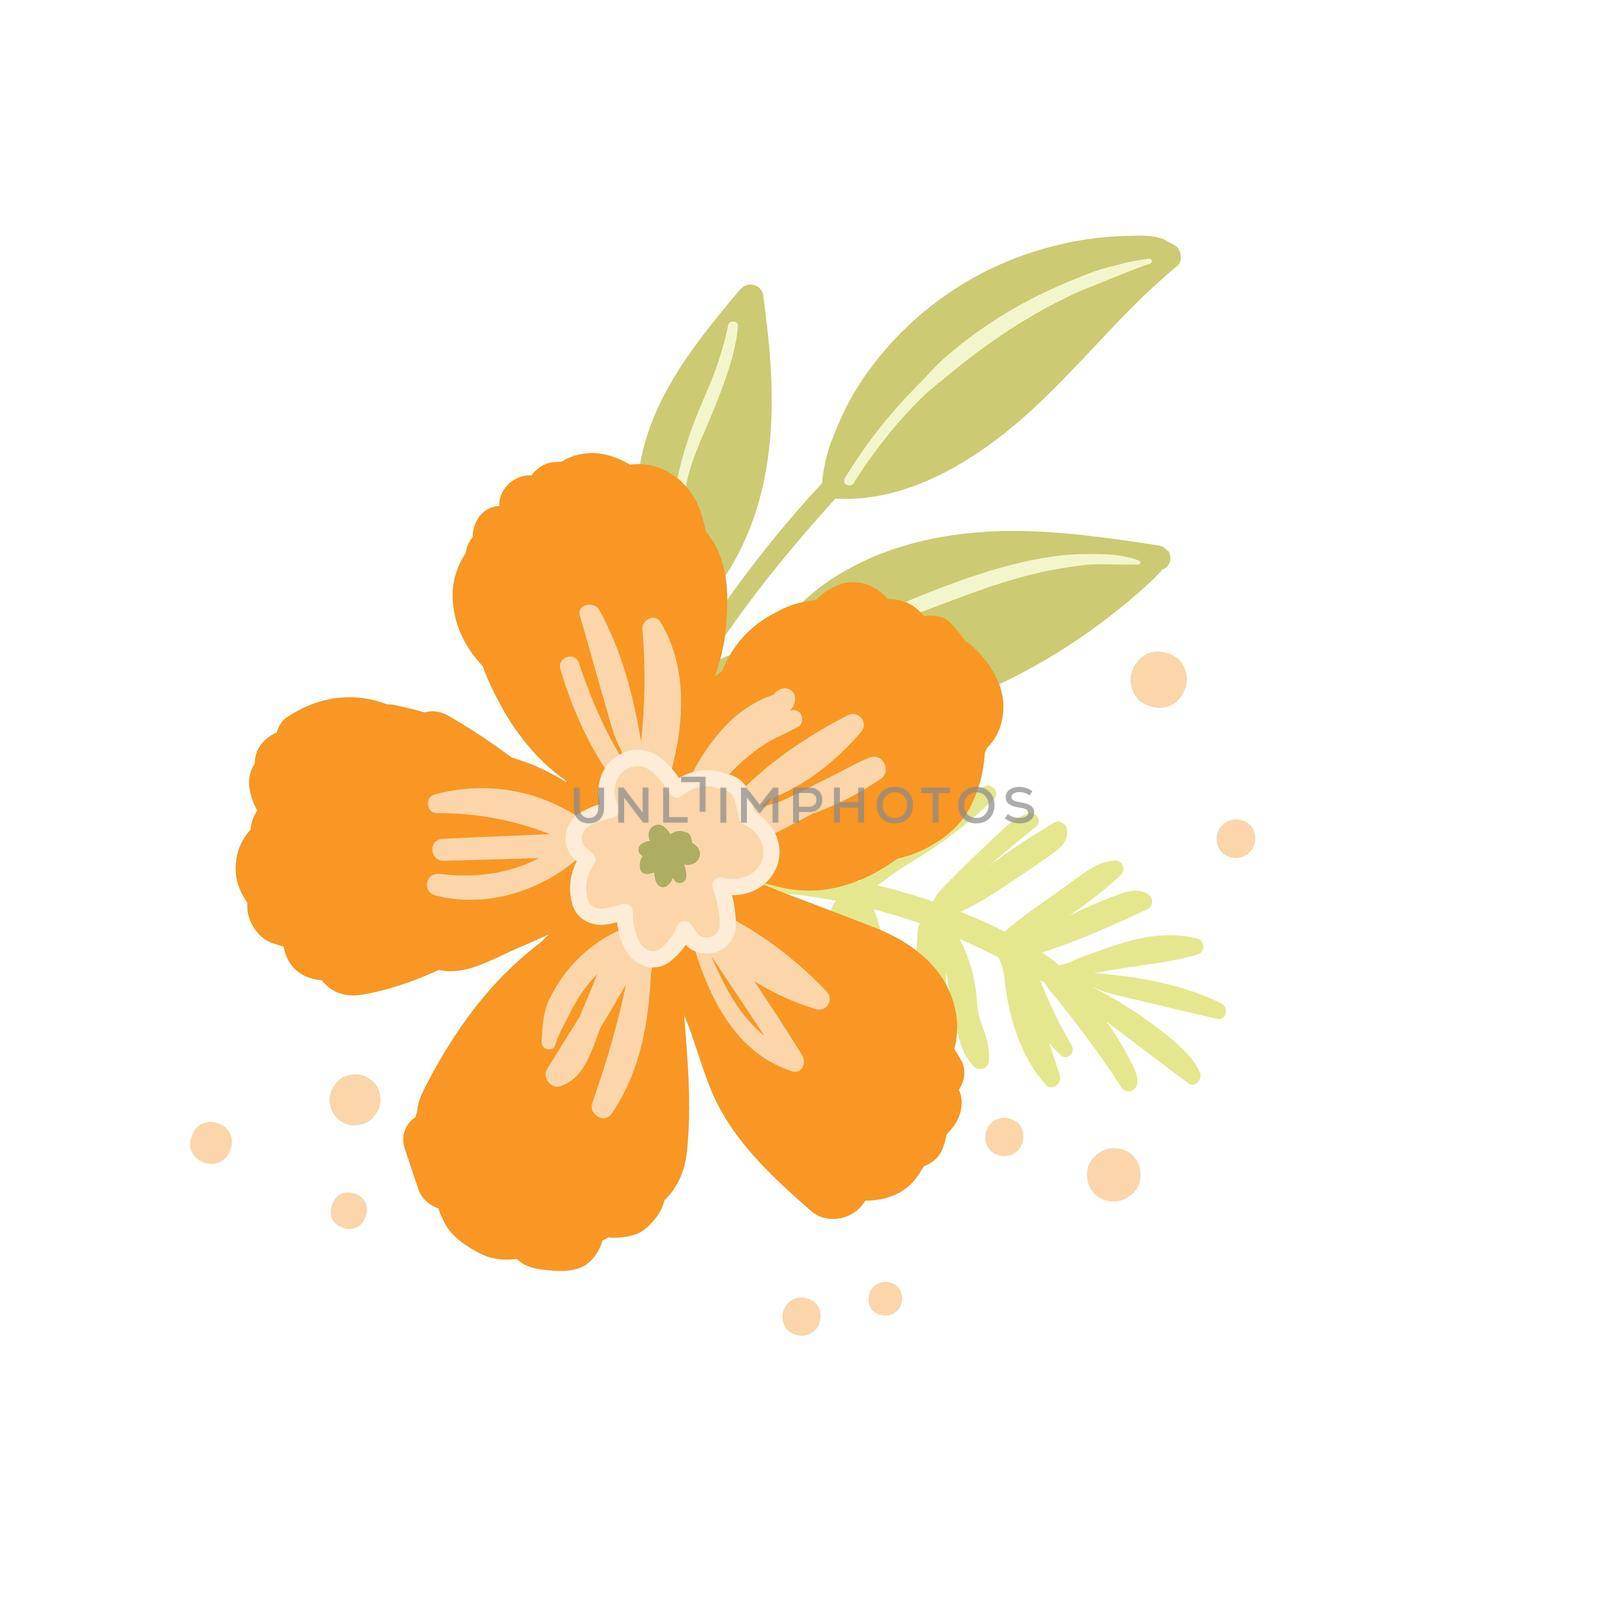 Floral set based on traditional folk art ornaments. Isolated orange and green flowers. Scandinavian style. Sweden nordic style. Vector illustration. Simple minimalistic nature element by allaku